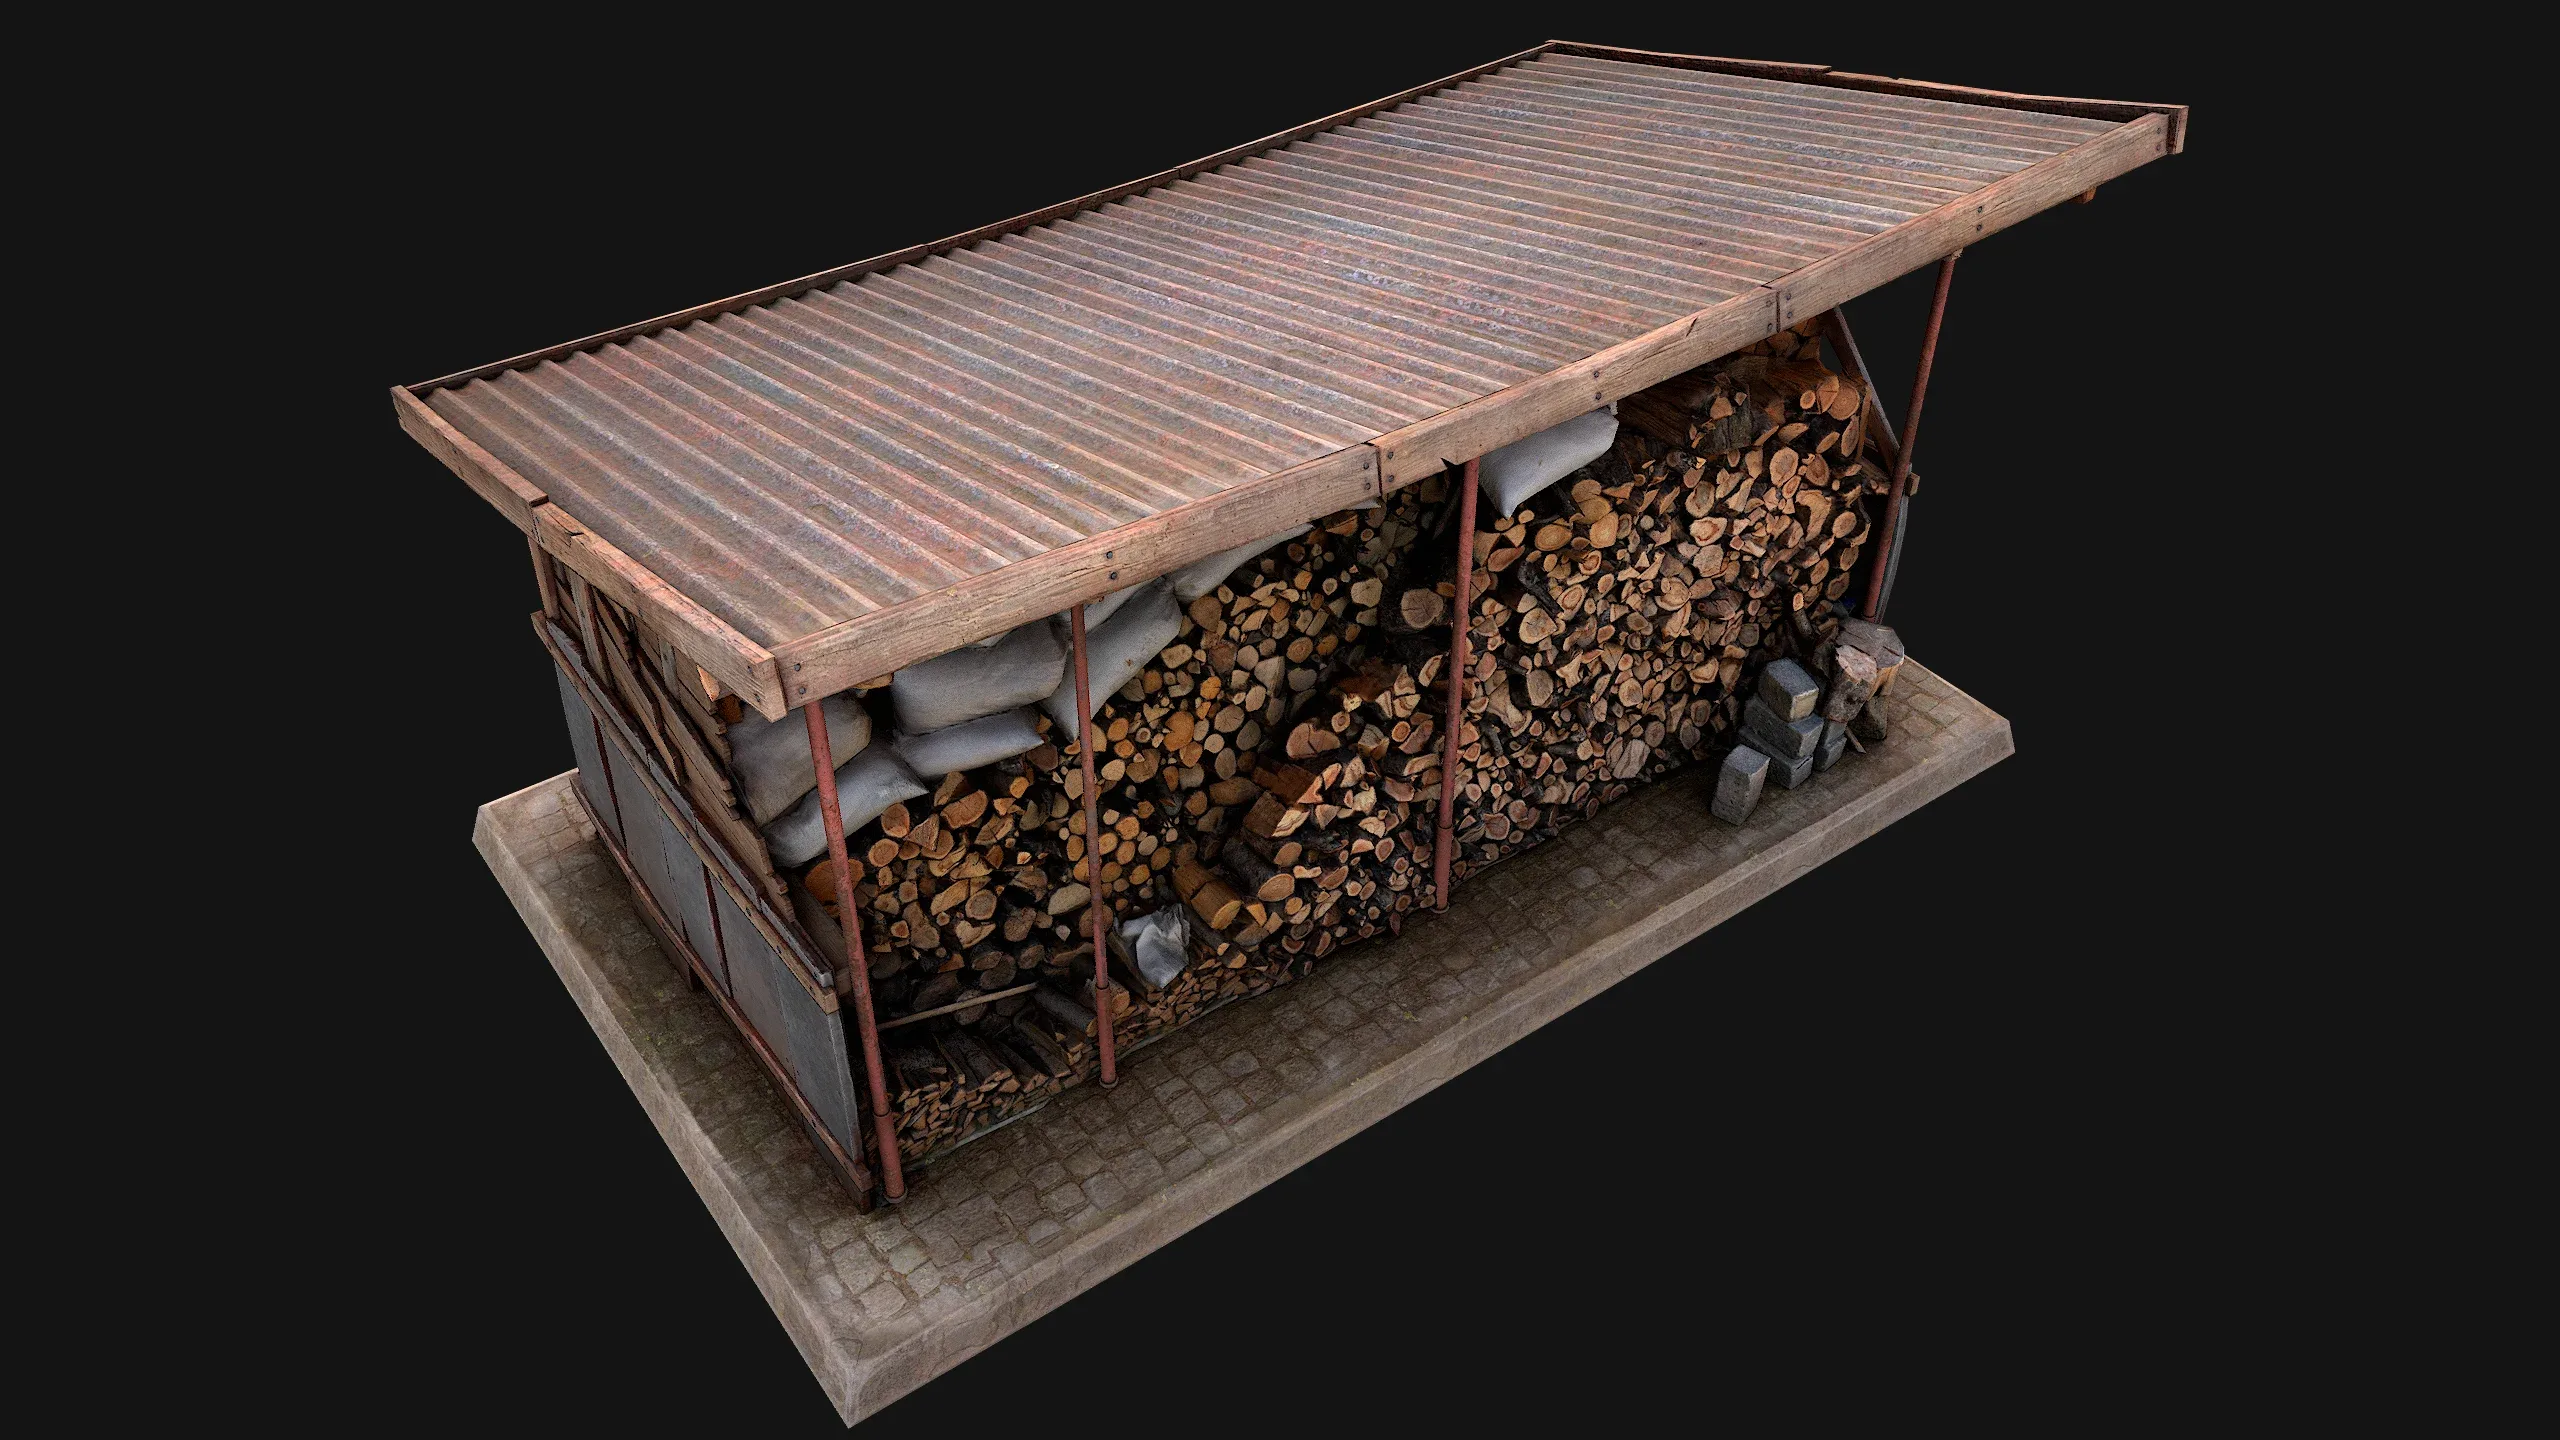 Fire Wood Storage Shelters Medieval Barn Warehouse